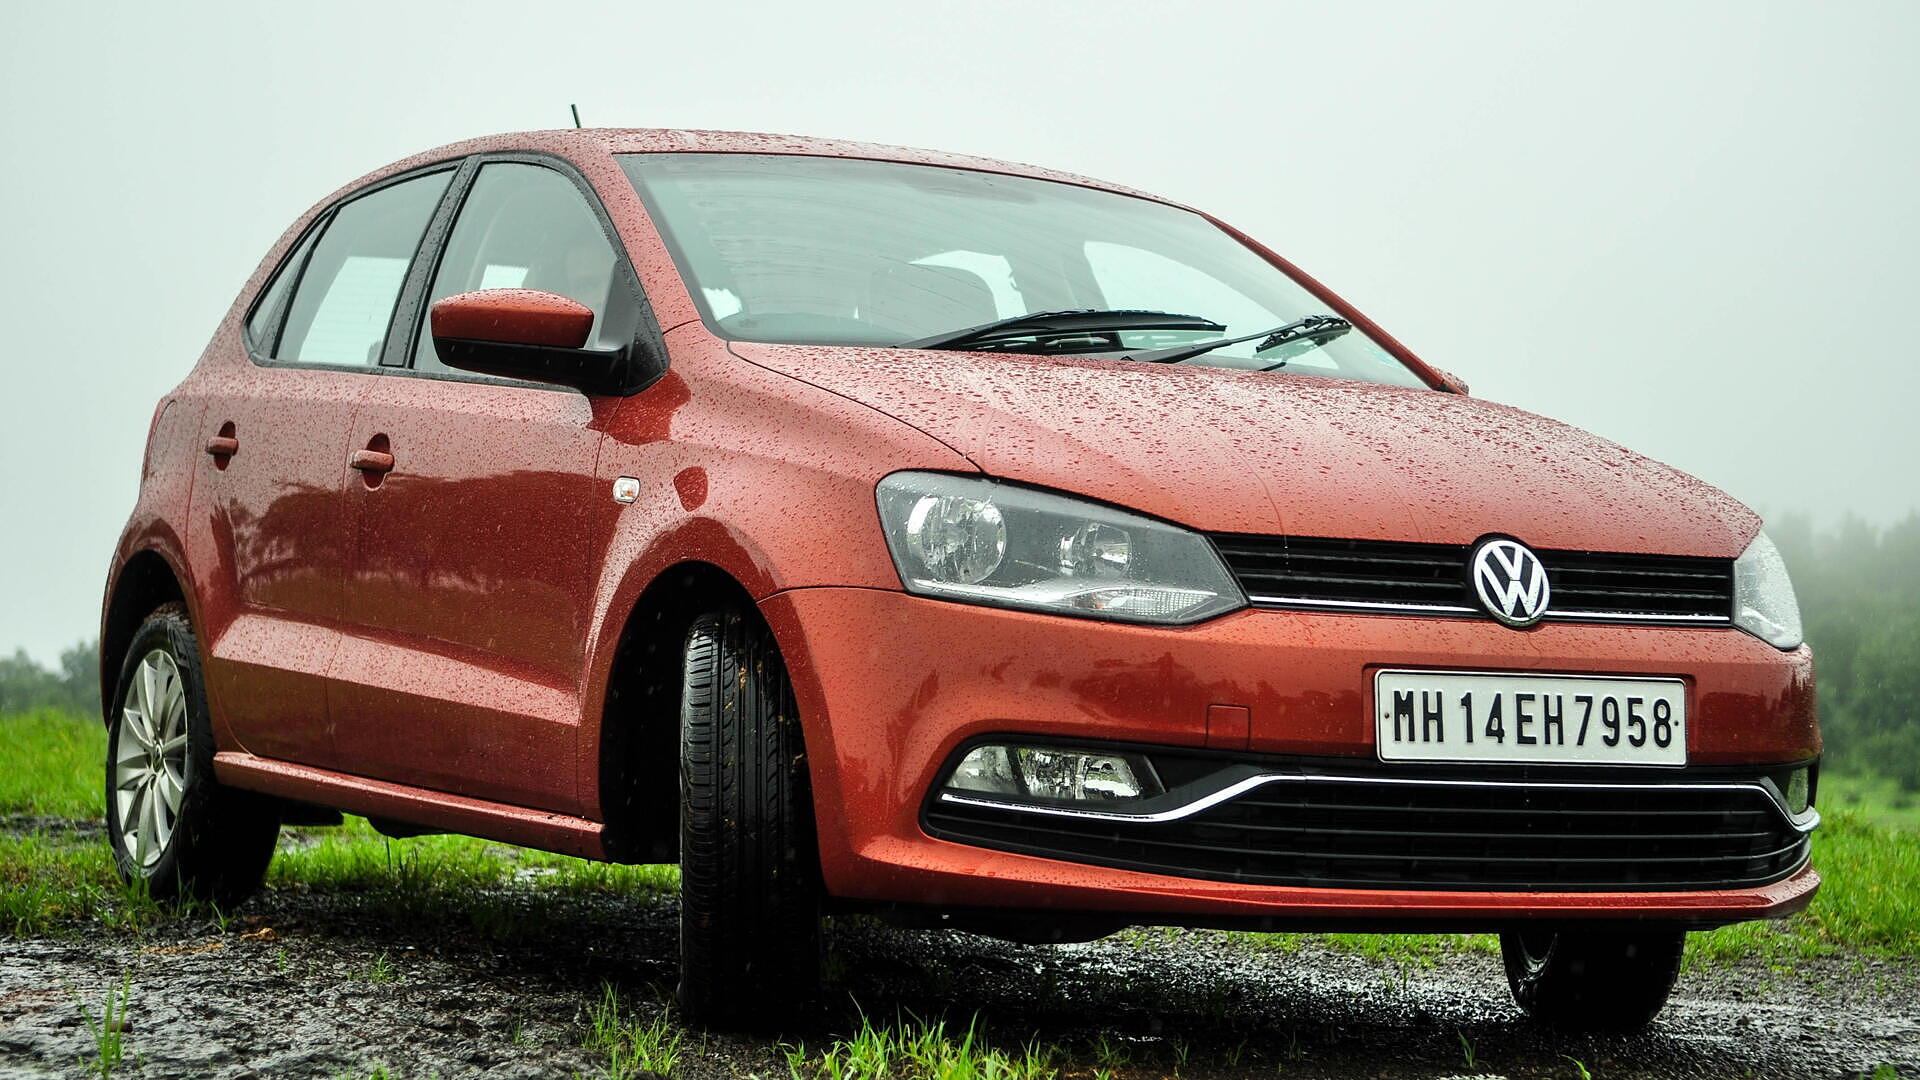 Polo [2014-2015] Right Front Three Quarter Polo [2014-2015] Photos in India - CarWale